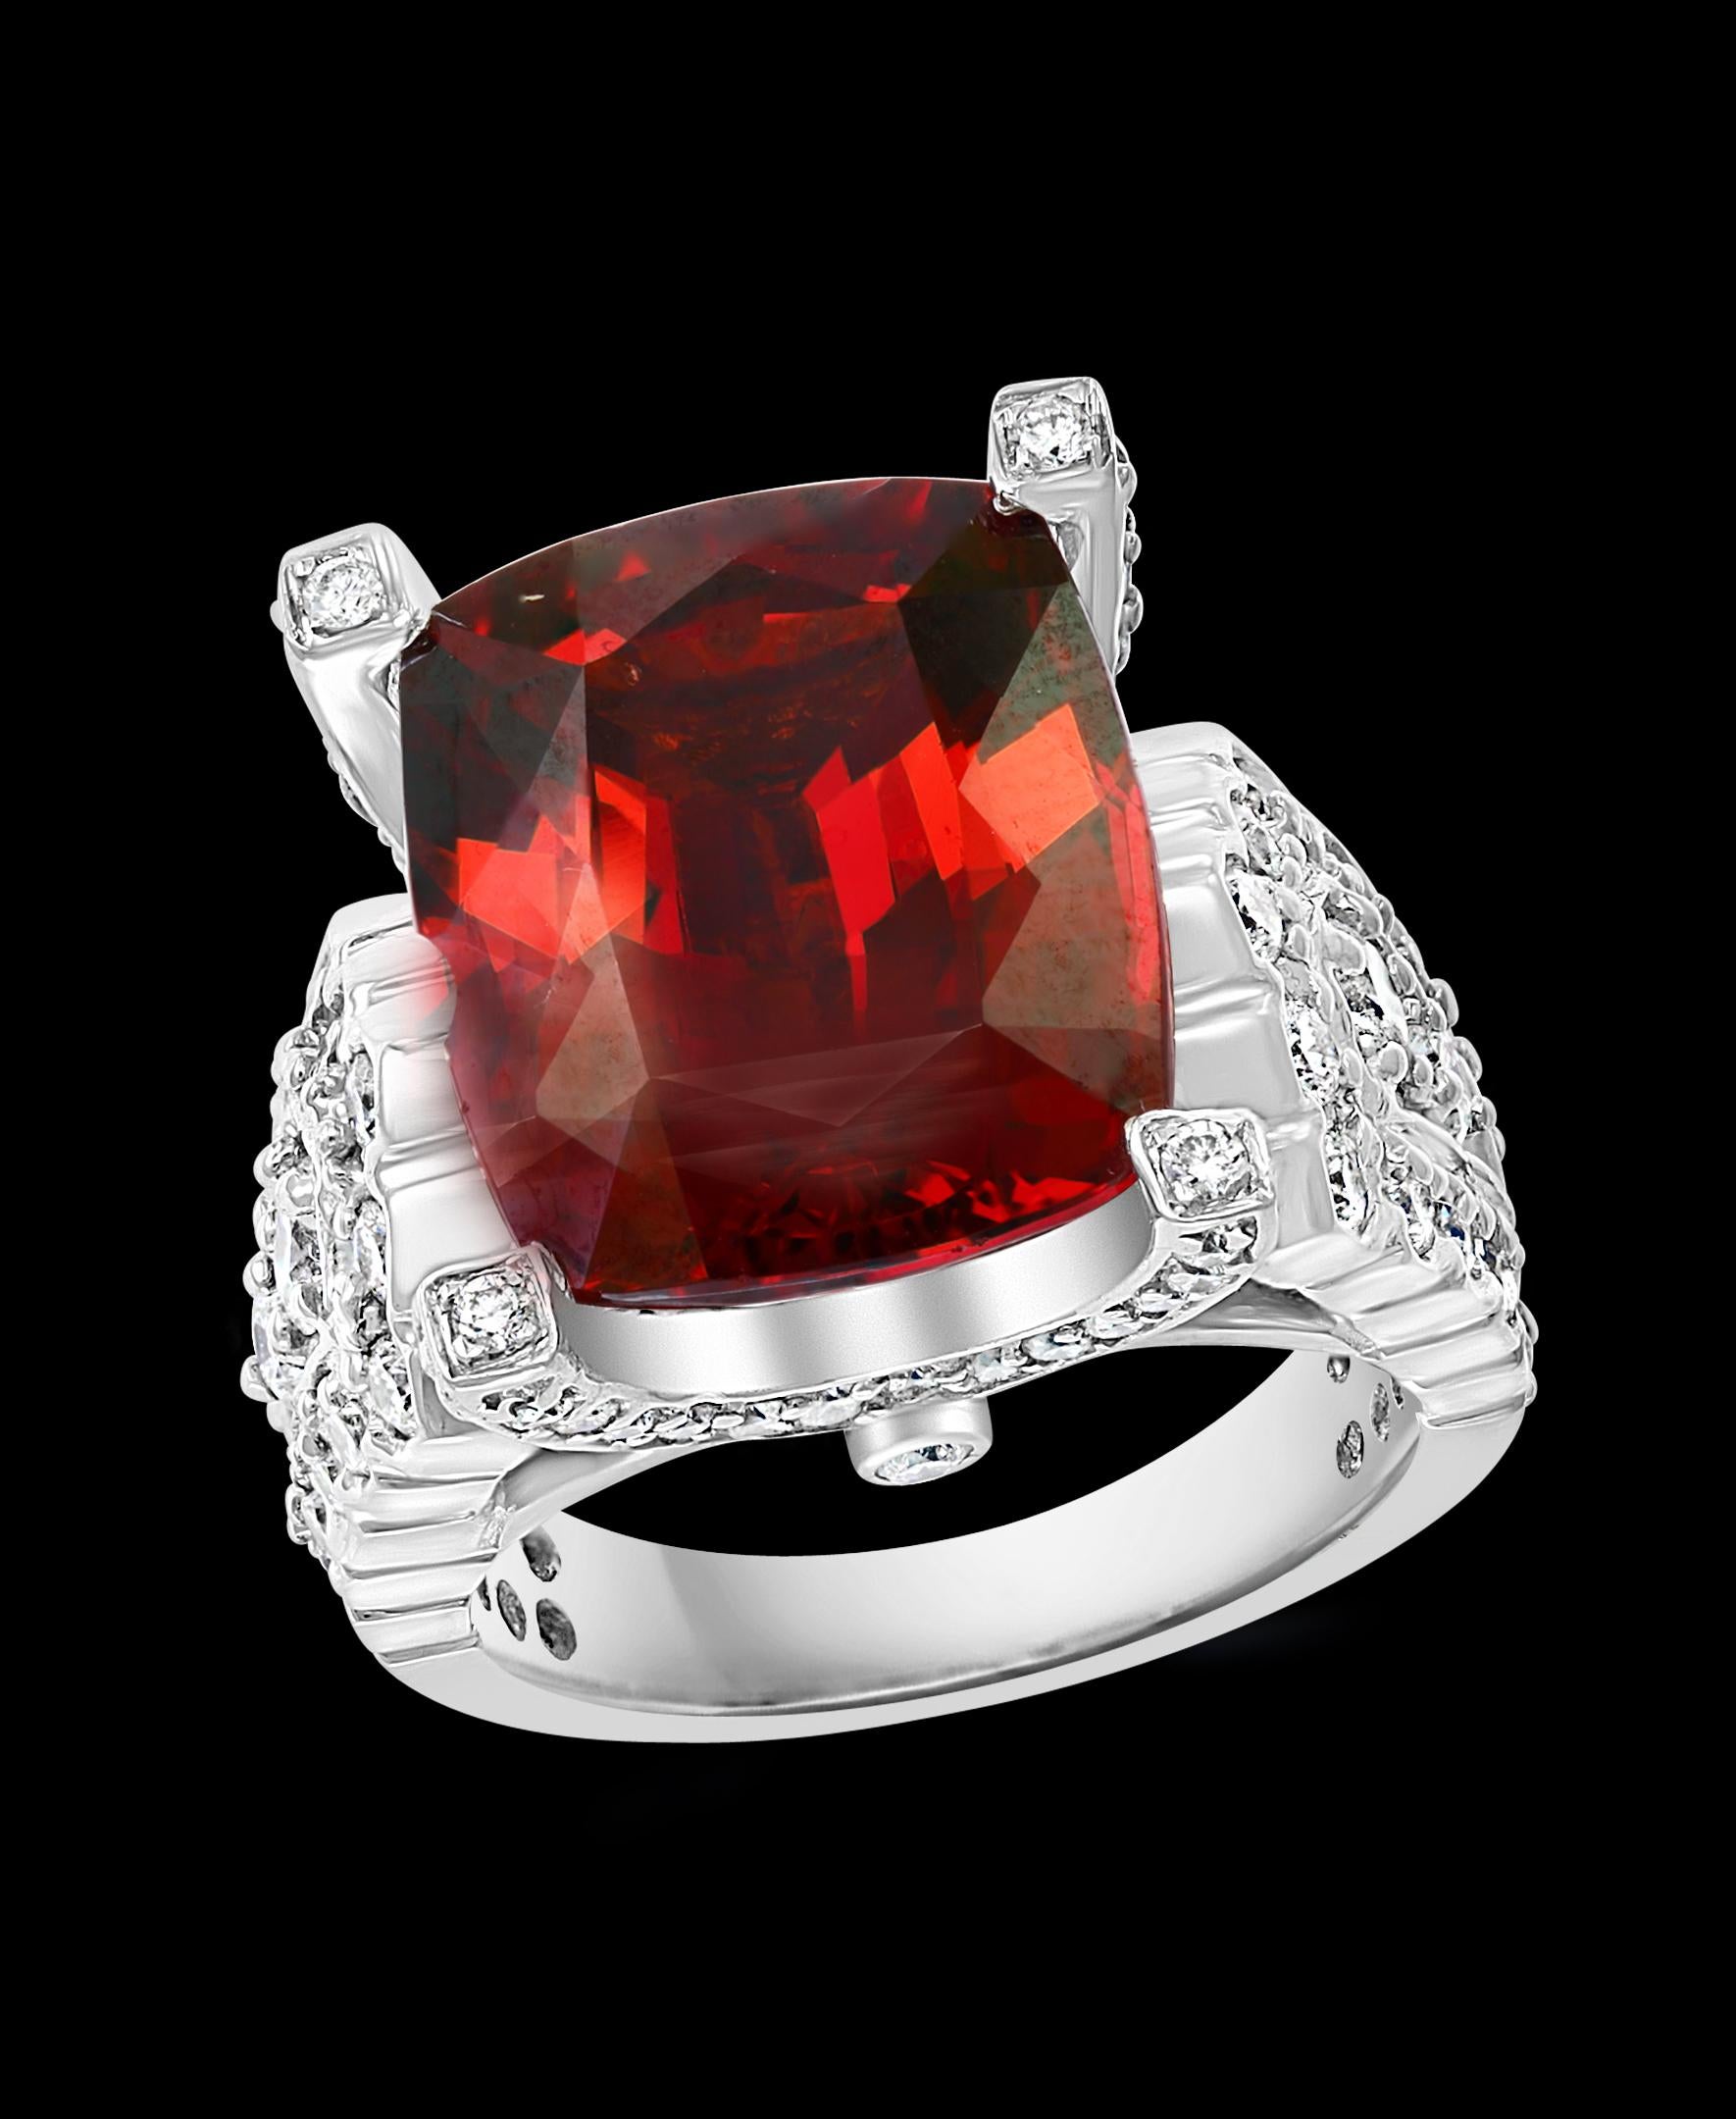  14.5 Carat Cushion Shape Rhodolite Garnet & 2 Ct Diamond Ring 18 Kt White Gold, Estate
This spectacular Ring consisting of a single Cushion l Shape  Extremely High quality Rhodolite Garnet approximately 14.5 Carat.  The  Garnet ring has